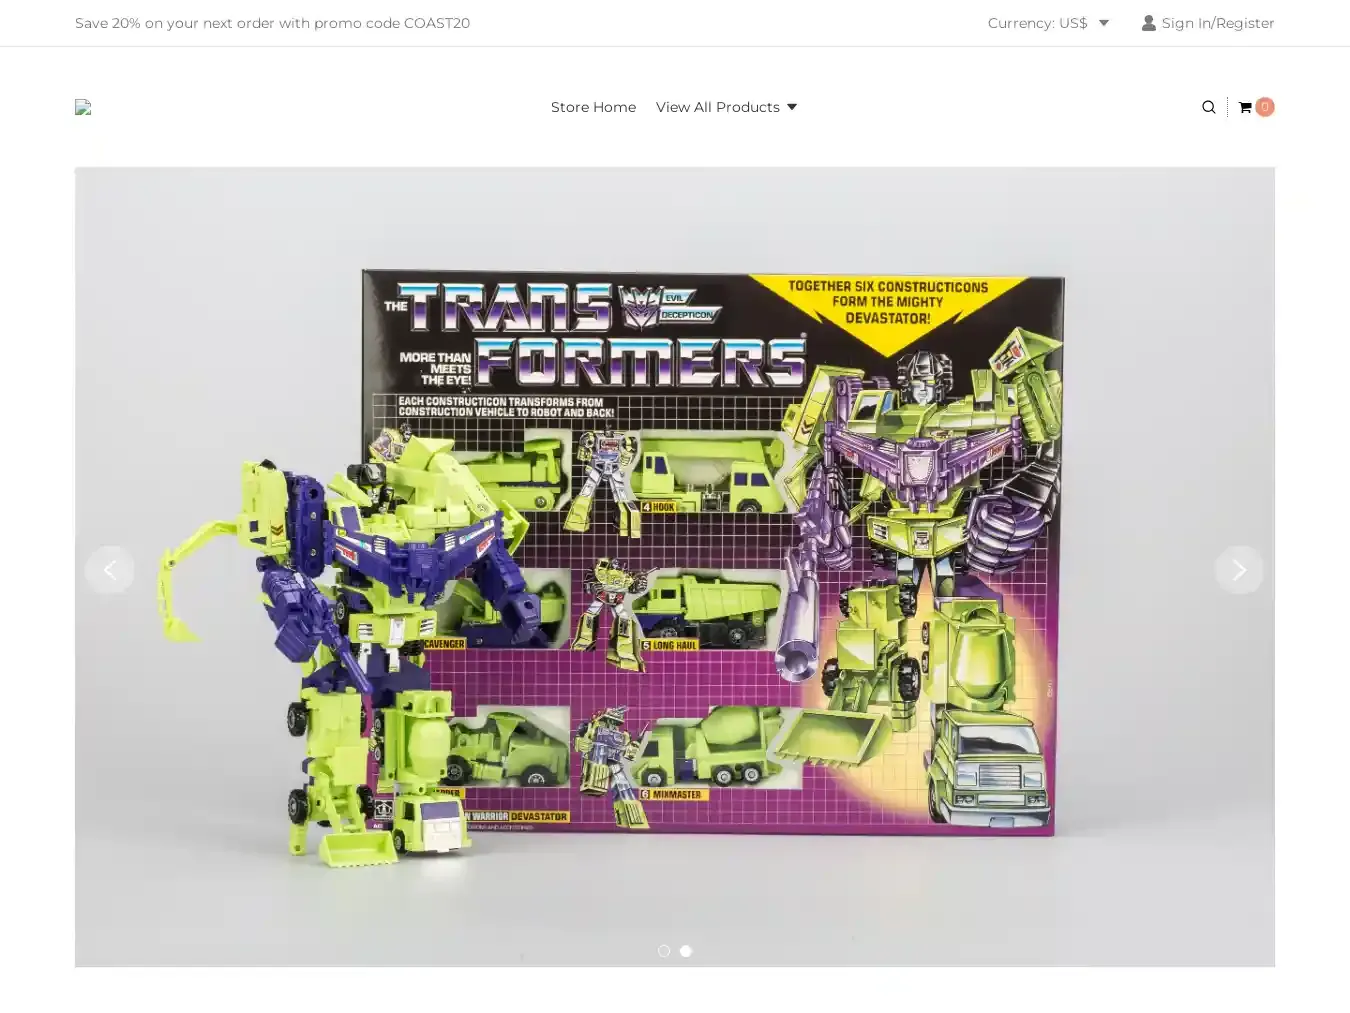 Xtransformers.net Fraudulent Non-Delivery website.